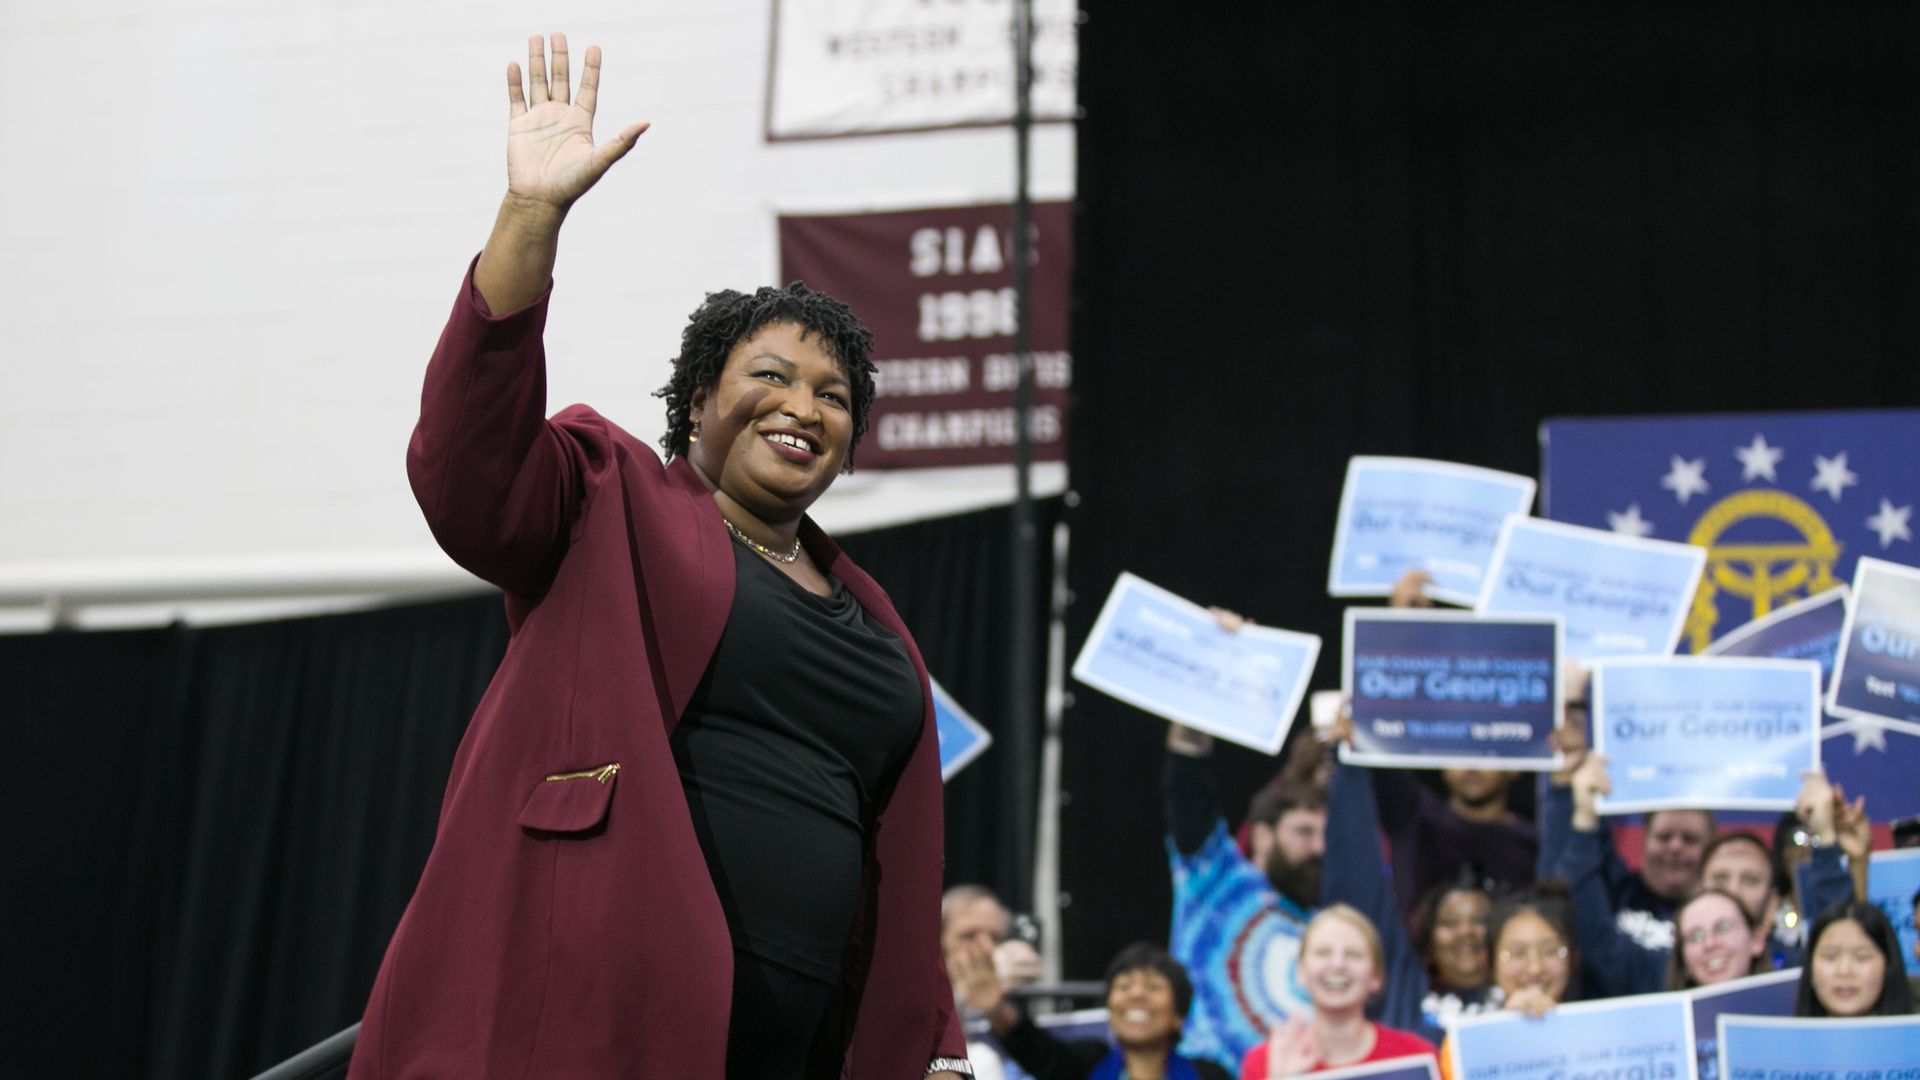 Stacey Abrams waving